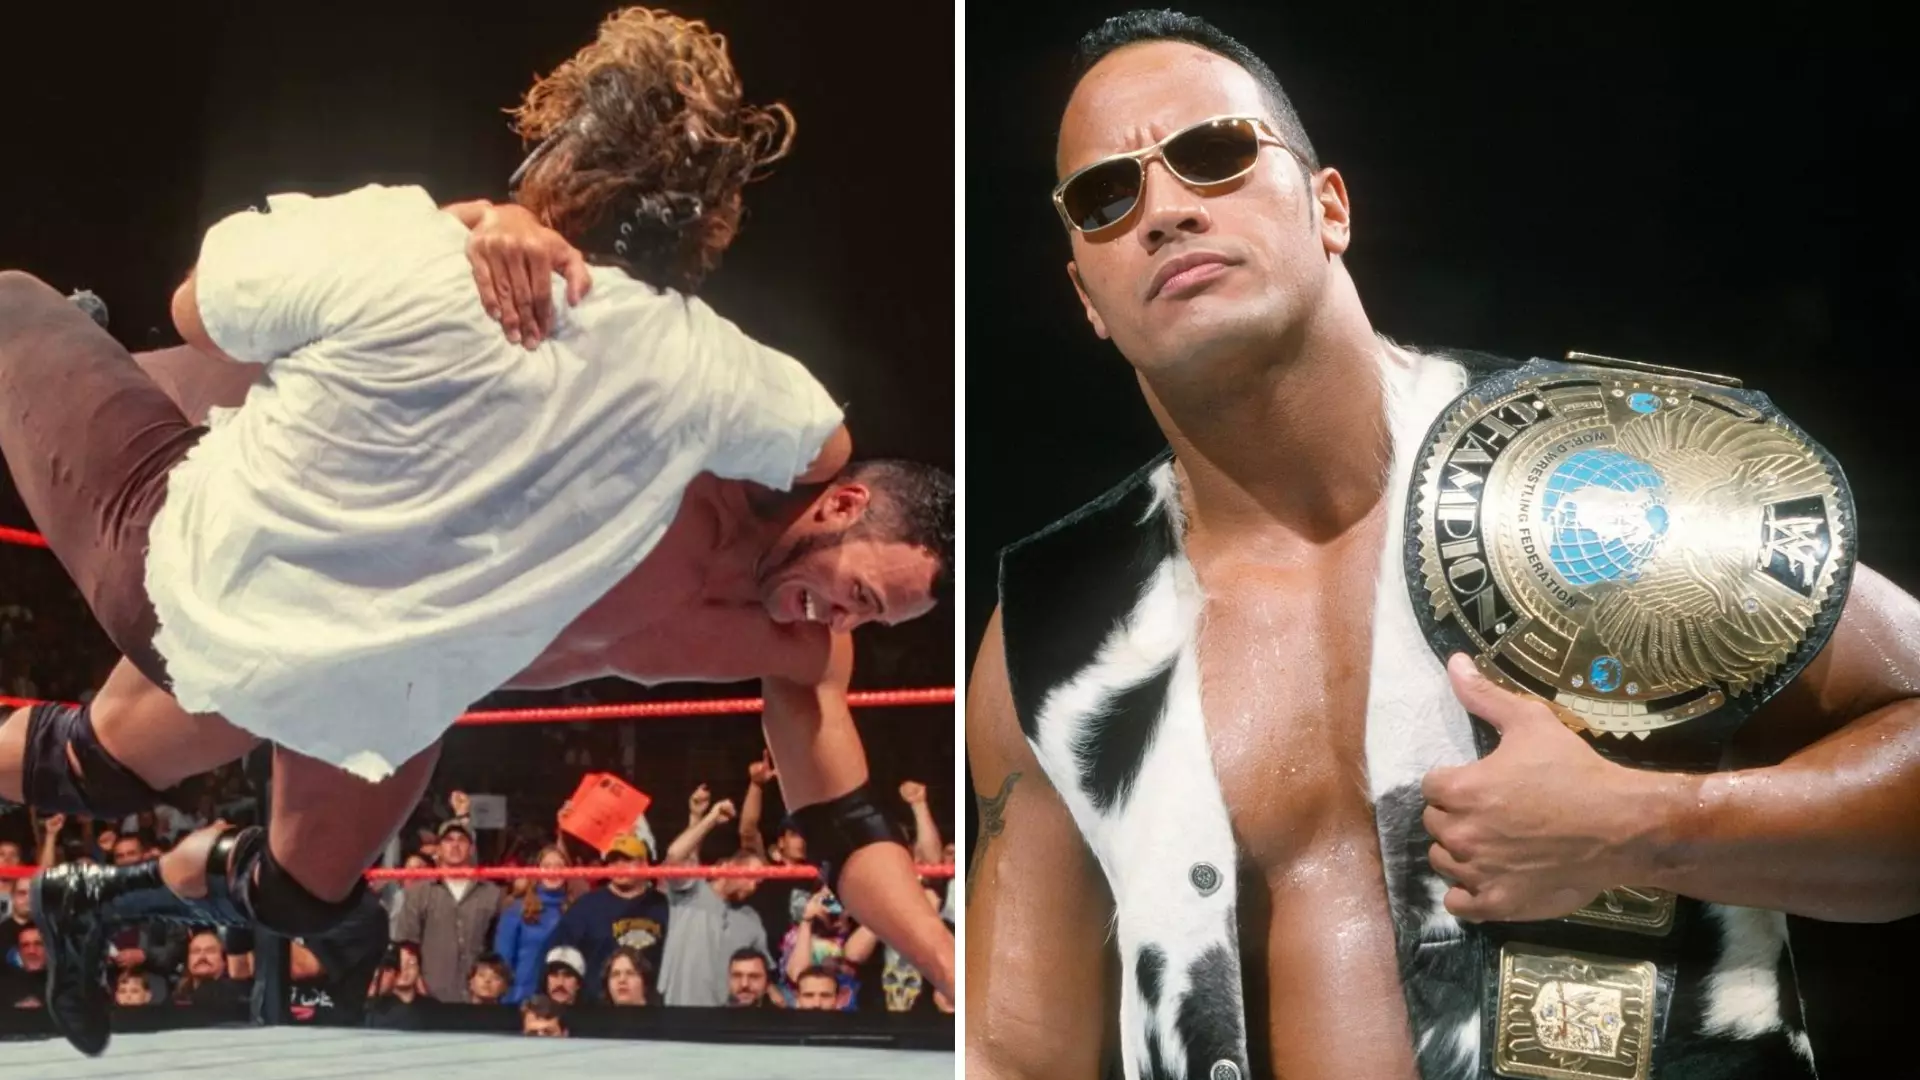 On This Day 20 Years Ago, The Rock Won His First WWE Title